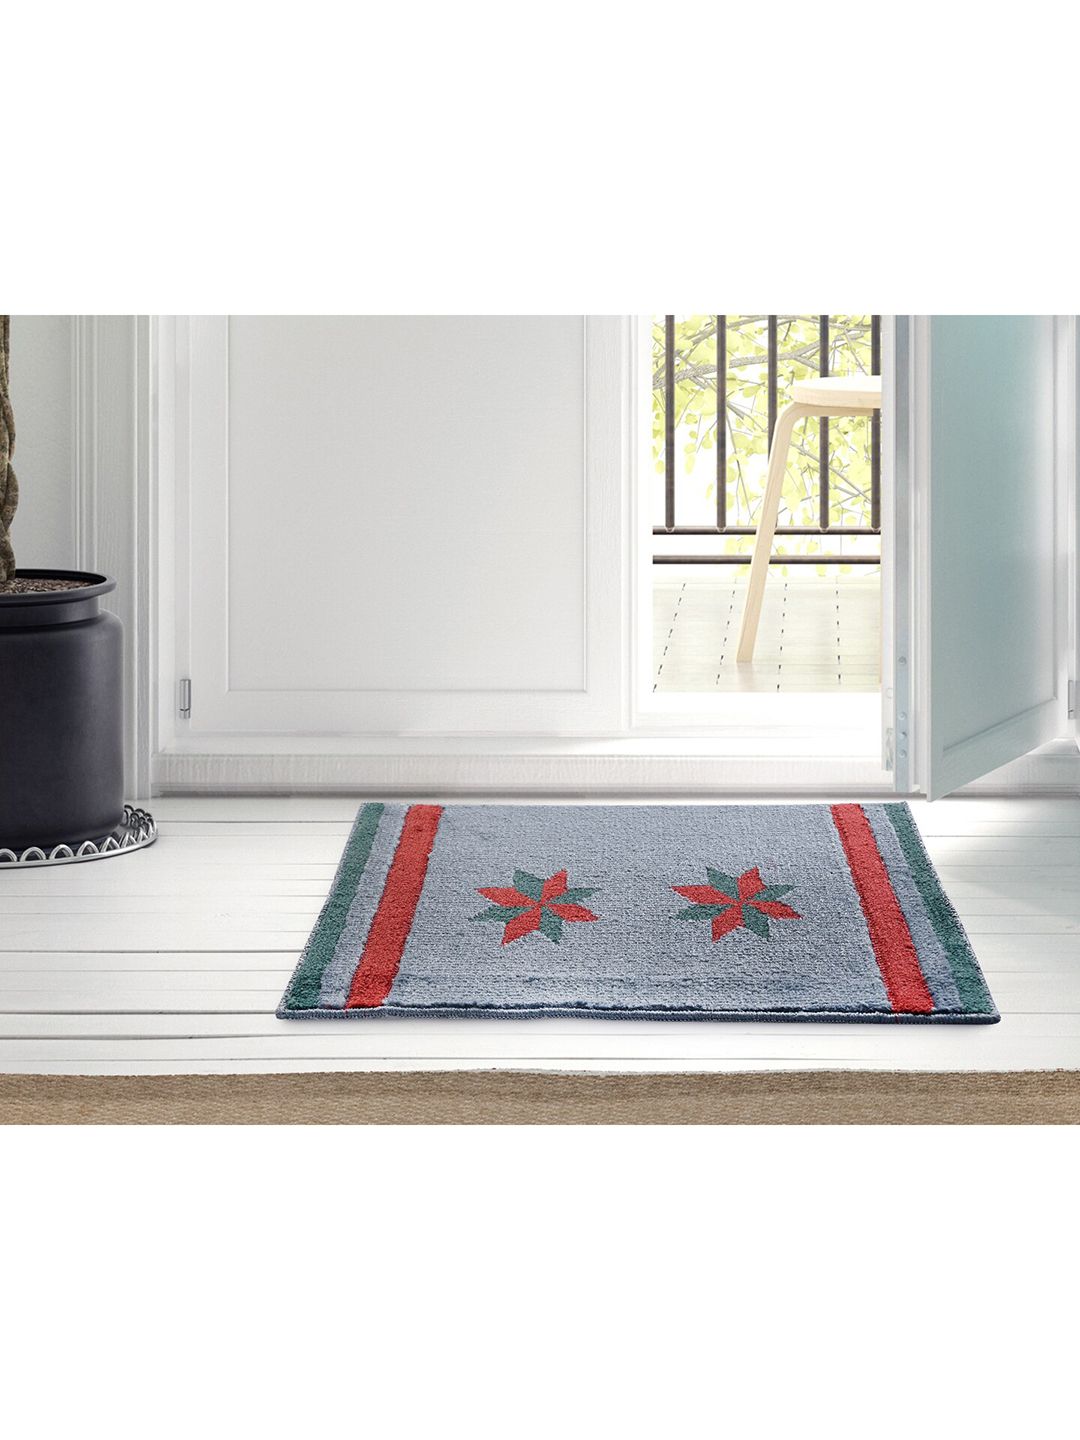 Saral Home Grey & Red Printed Anti-Skid Cotton Doormat Price in India